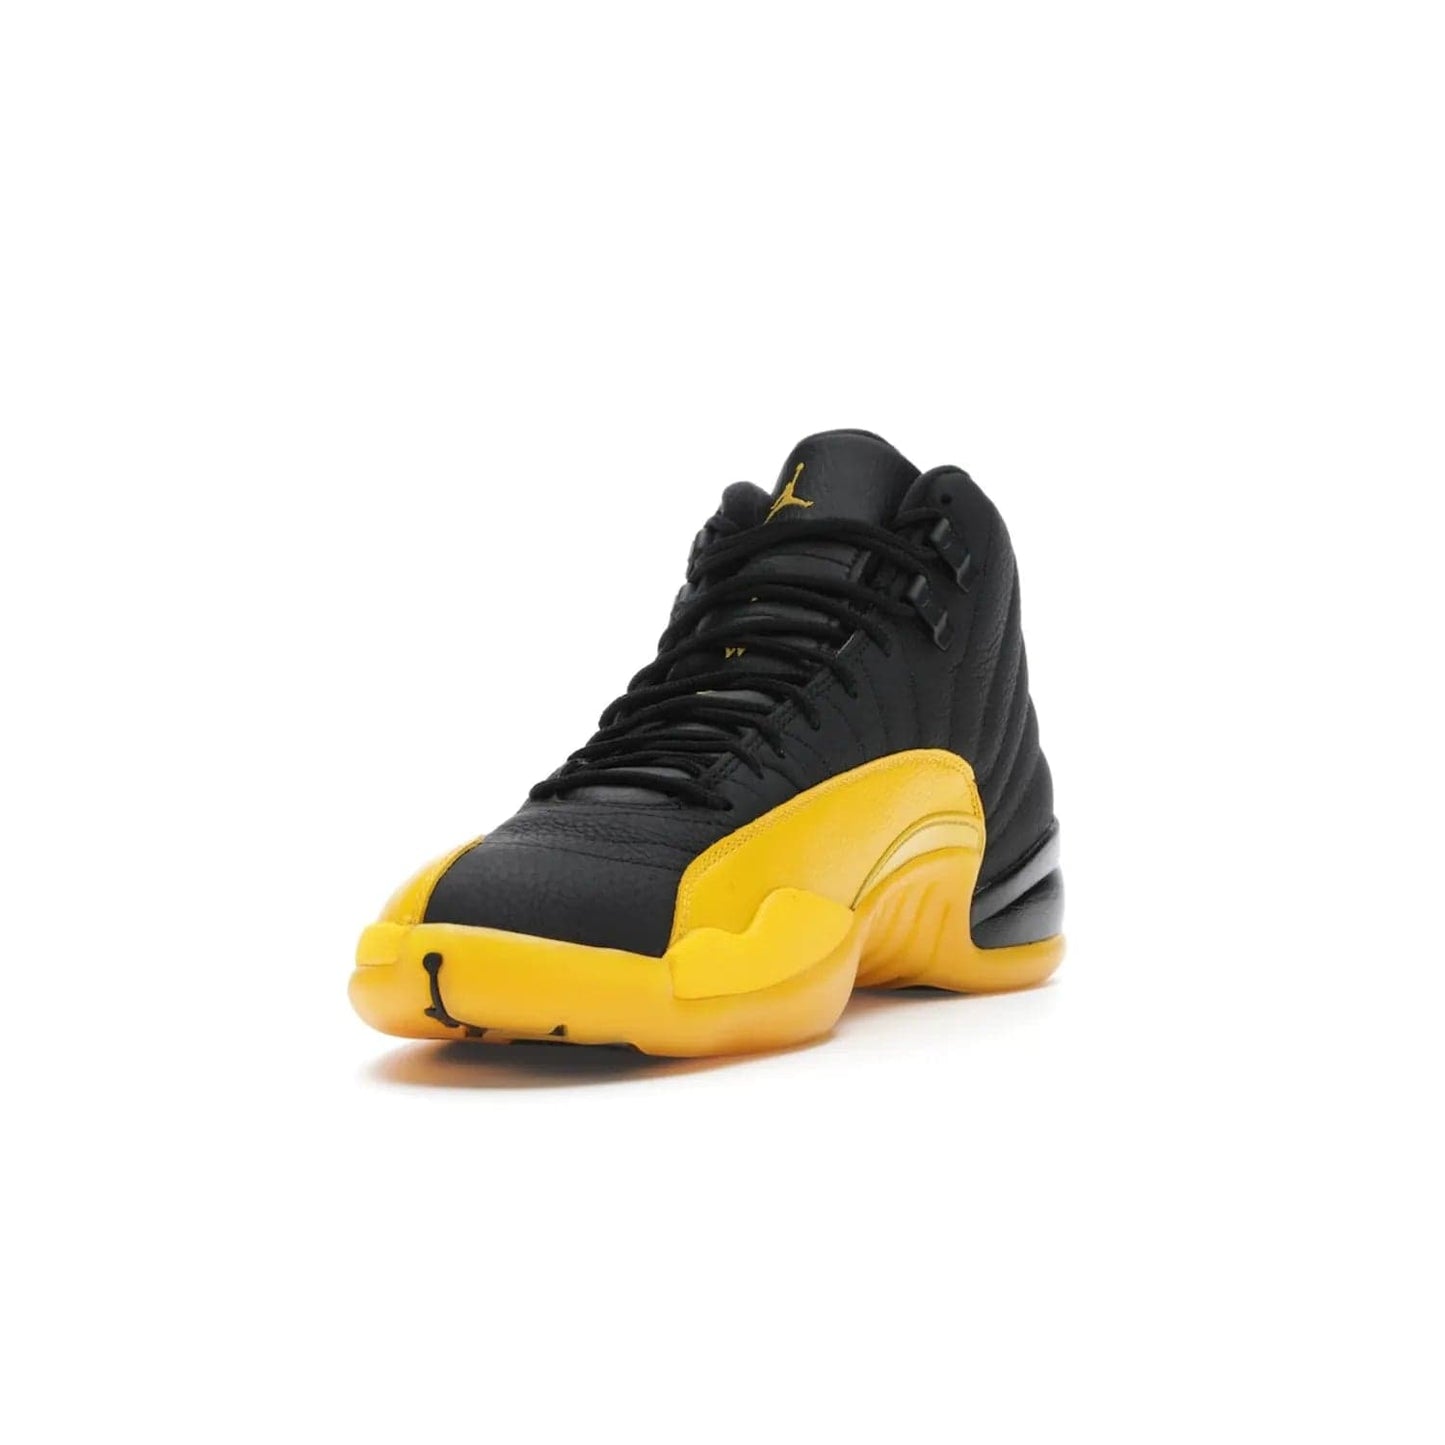 Jordan 12 Retro Black University Gold - Image 13 - Only at www.BallersClubKickz.com - This Jordan 12 Retro features a black tumbled leather upper and University Gold accents for a modern twist. Boasting Jordan "Two Three" branding and a yellow sole, these shoes will elevate your wardrobe. Fresh, sleek, and one of a kind - the Jordan 12 University Gold is your summer sneaker.